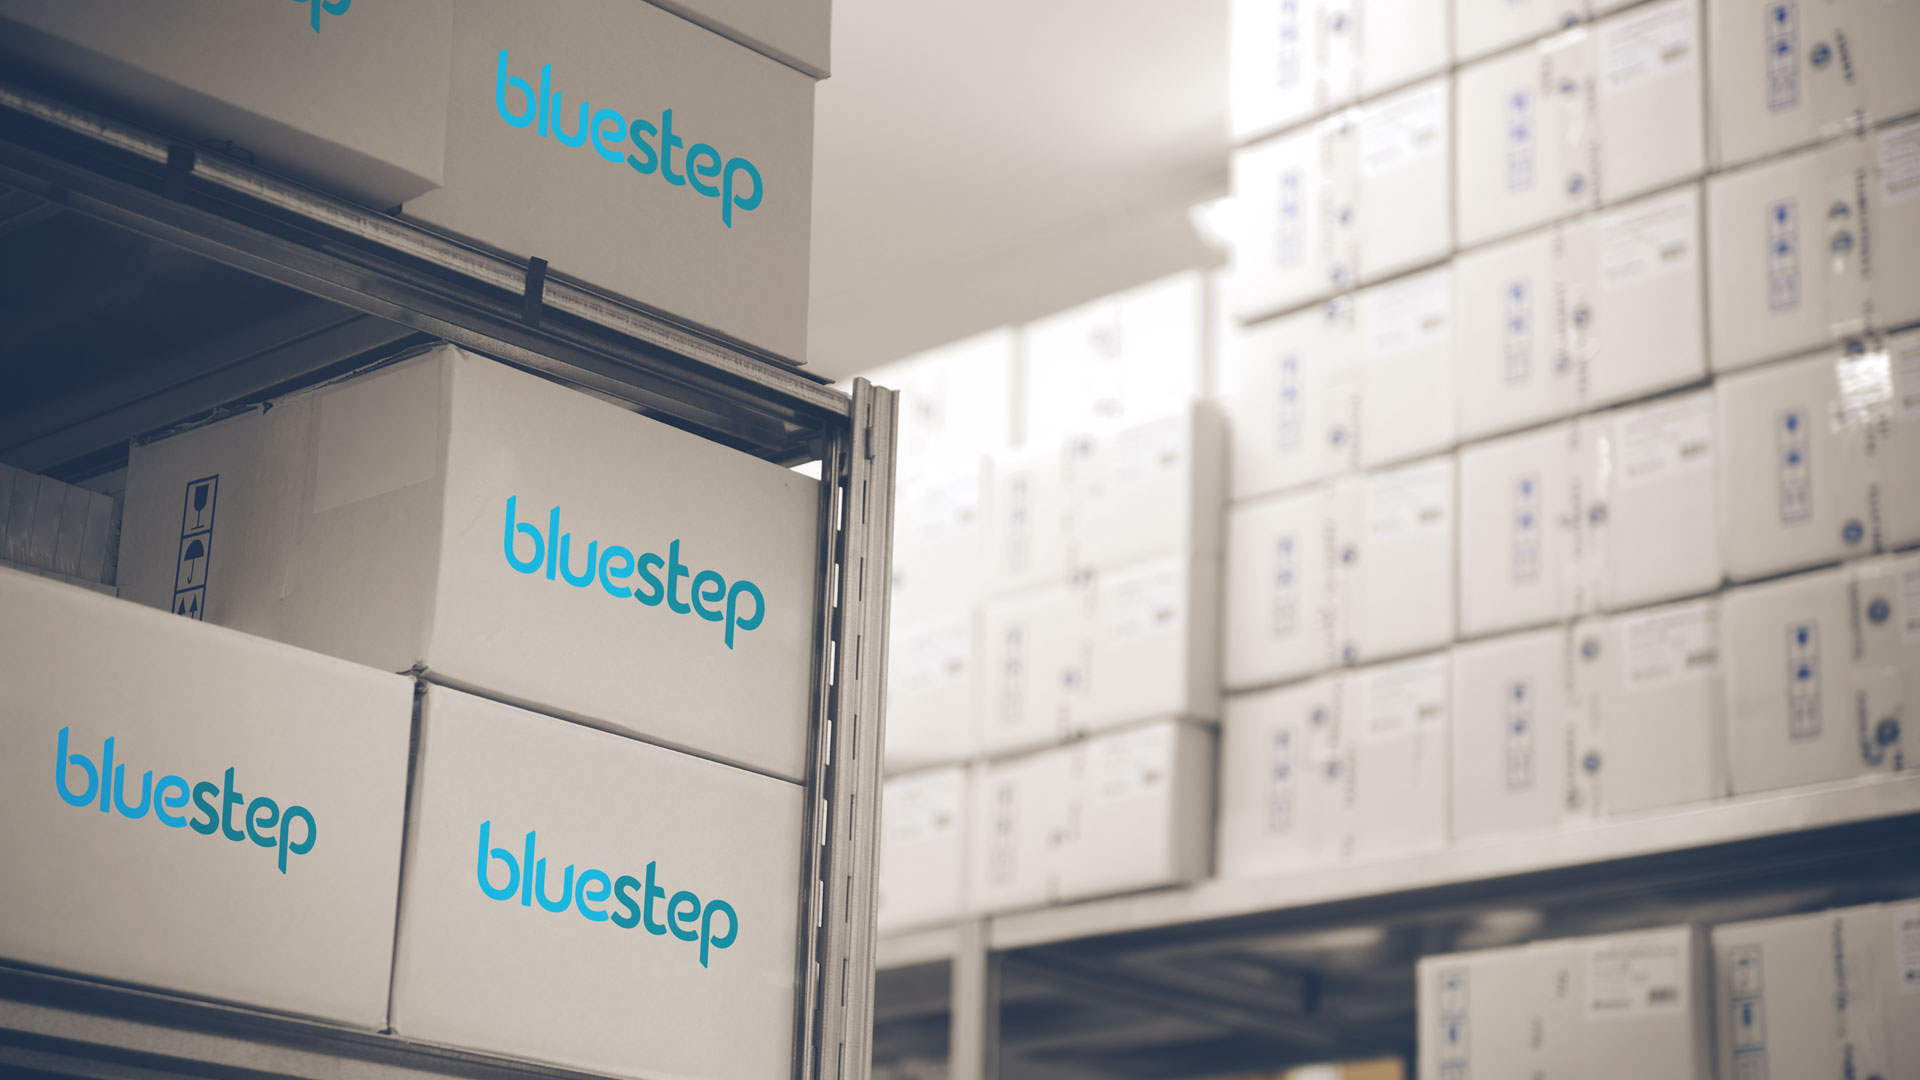 An image showing the Bluestep Warehouse based in Blisworth, Northampton